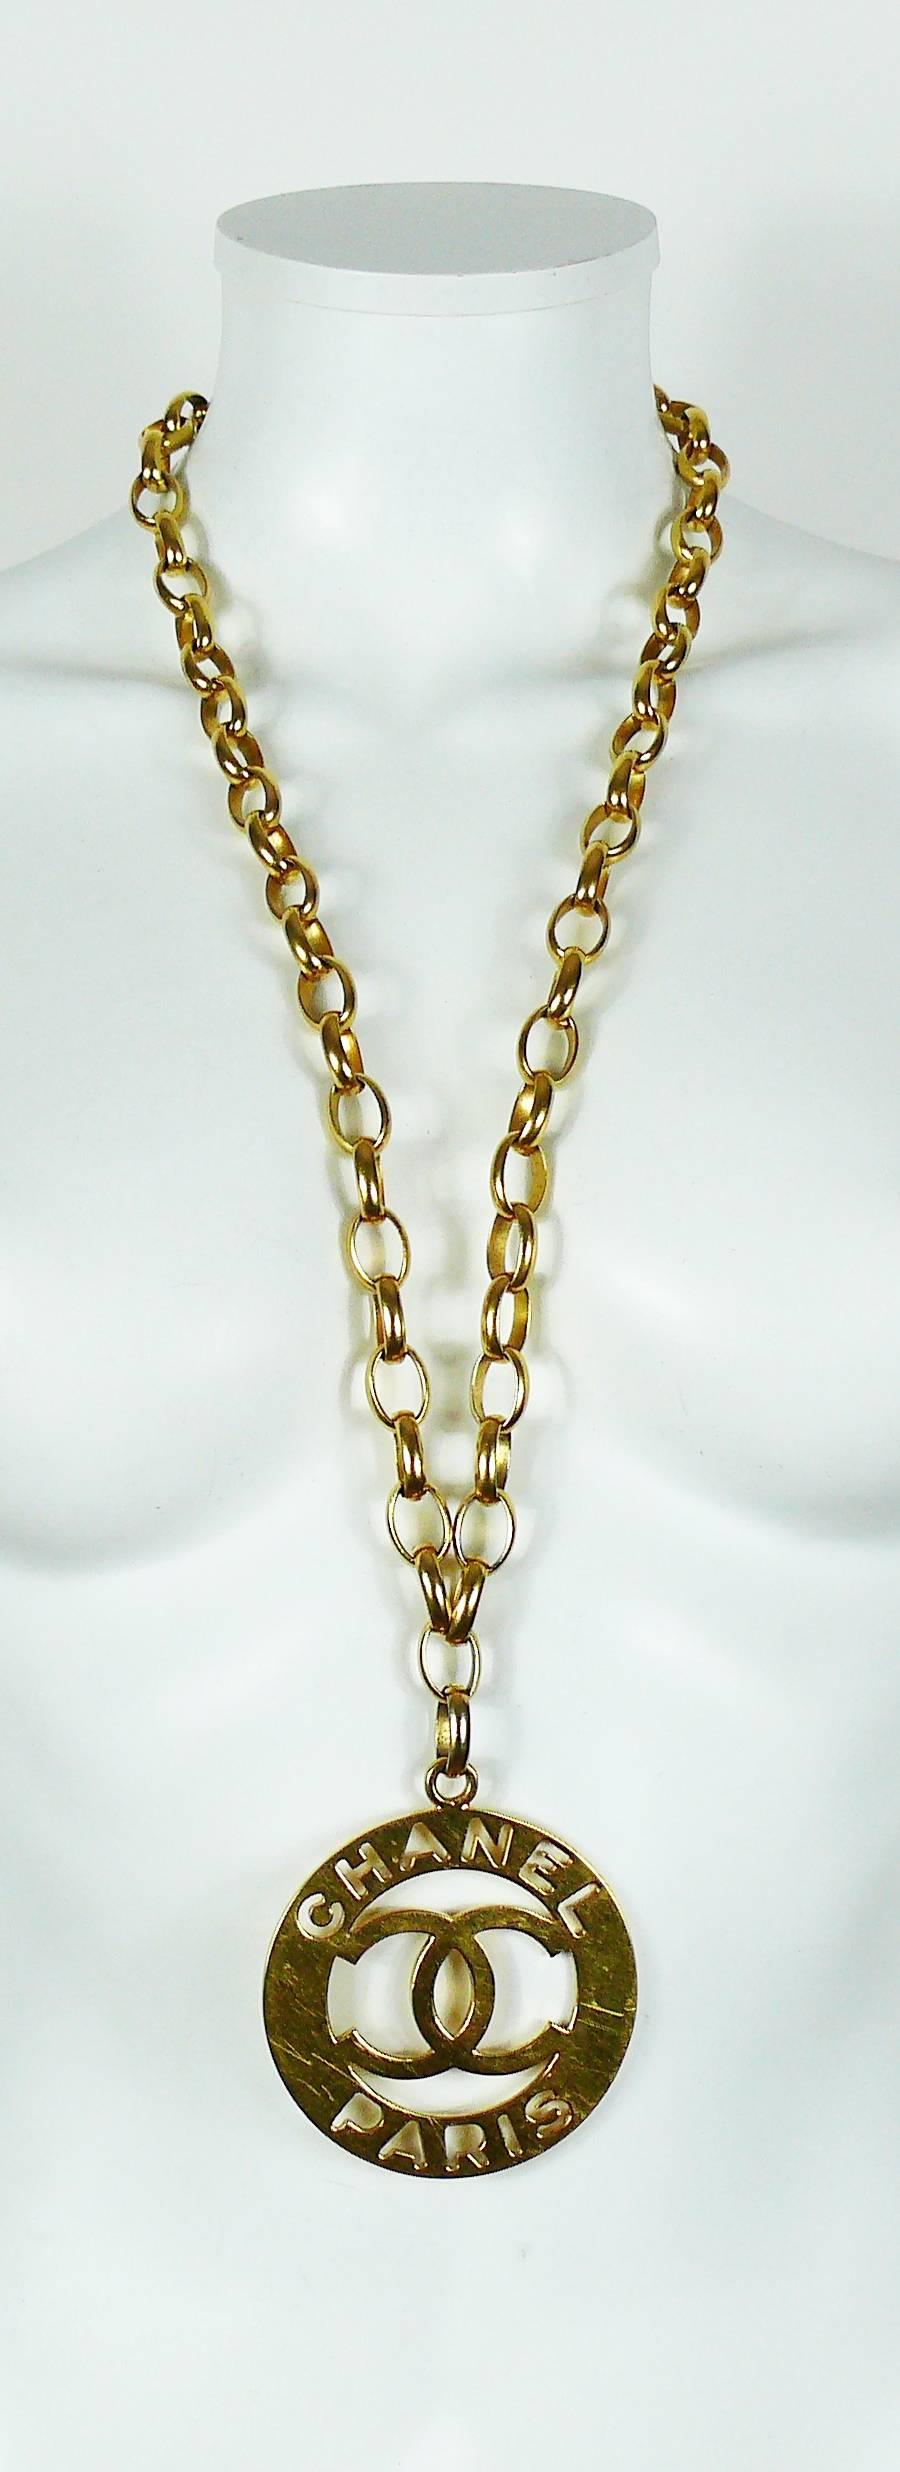 CHANEL vintage iconic gold toned necklace featuring a massive CHANEL PARIS CC logo cutout openwork medallion pendant.

This necklace features a long chunky link chain that could be used as a belt or a single/double strand necklace.

Hook